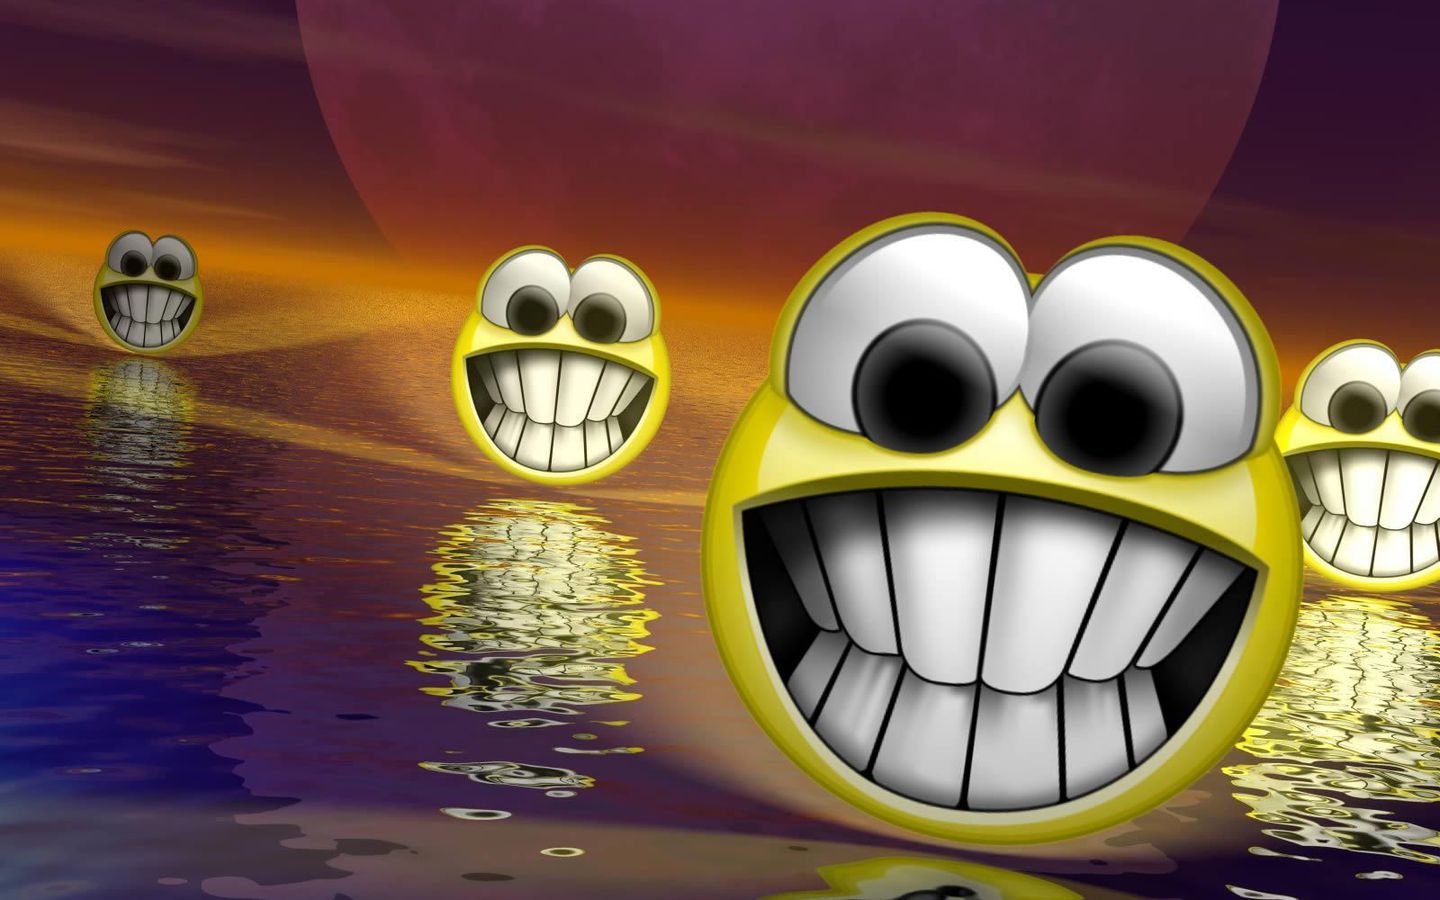 Smileys Faces hd Pictures image size 1440x900 free